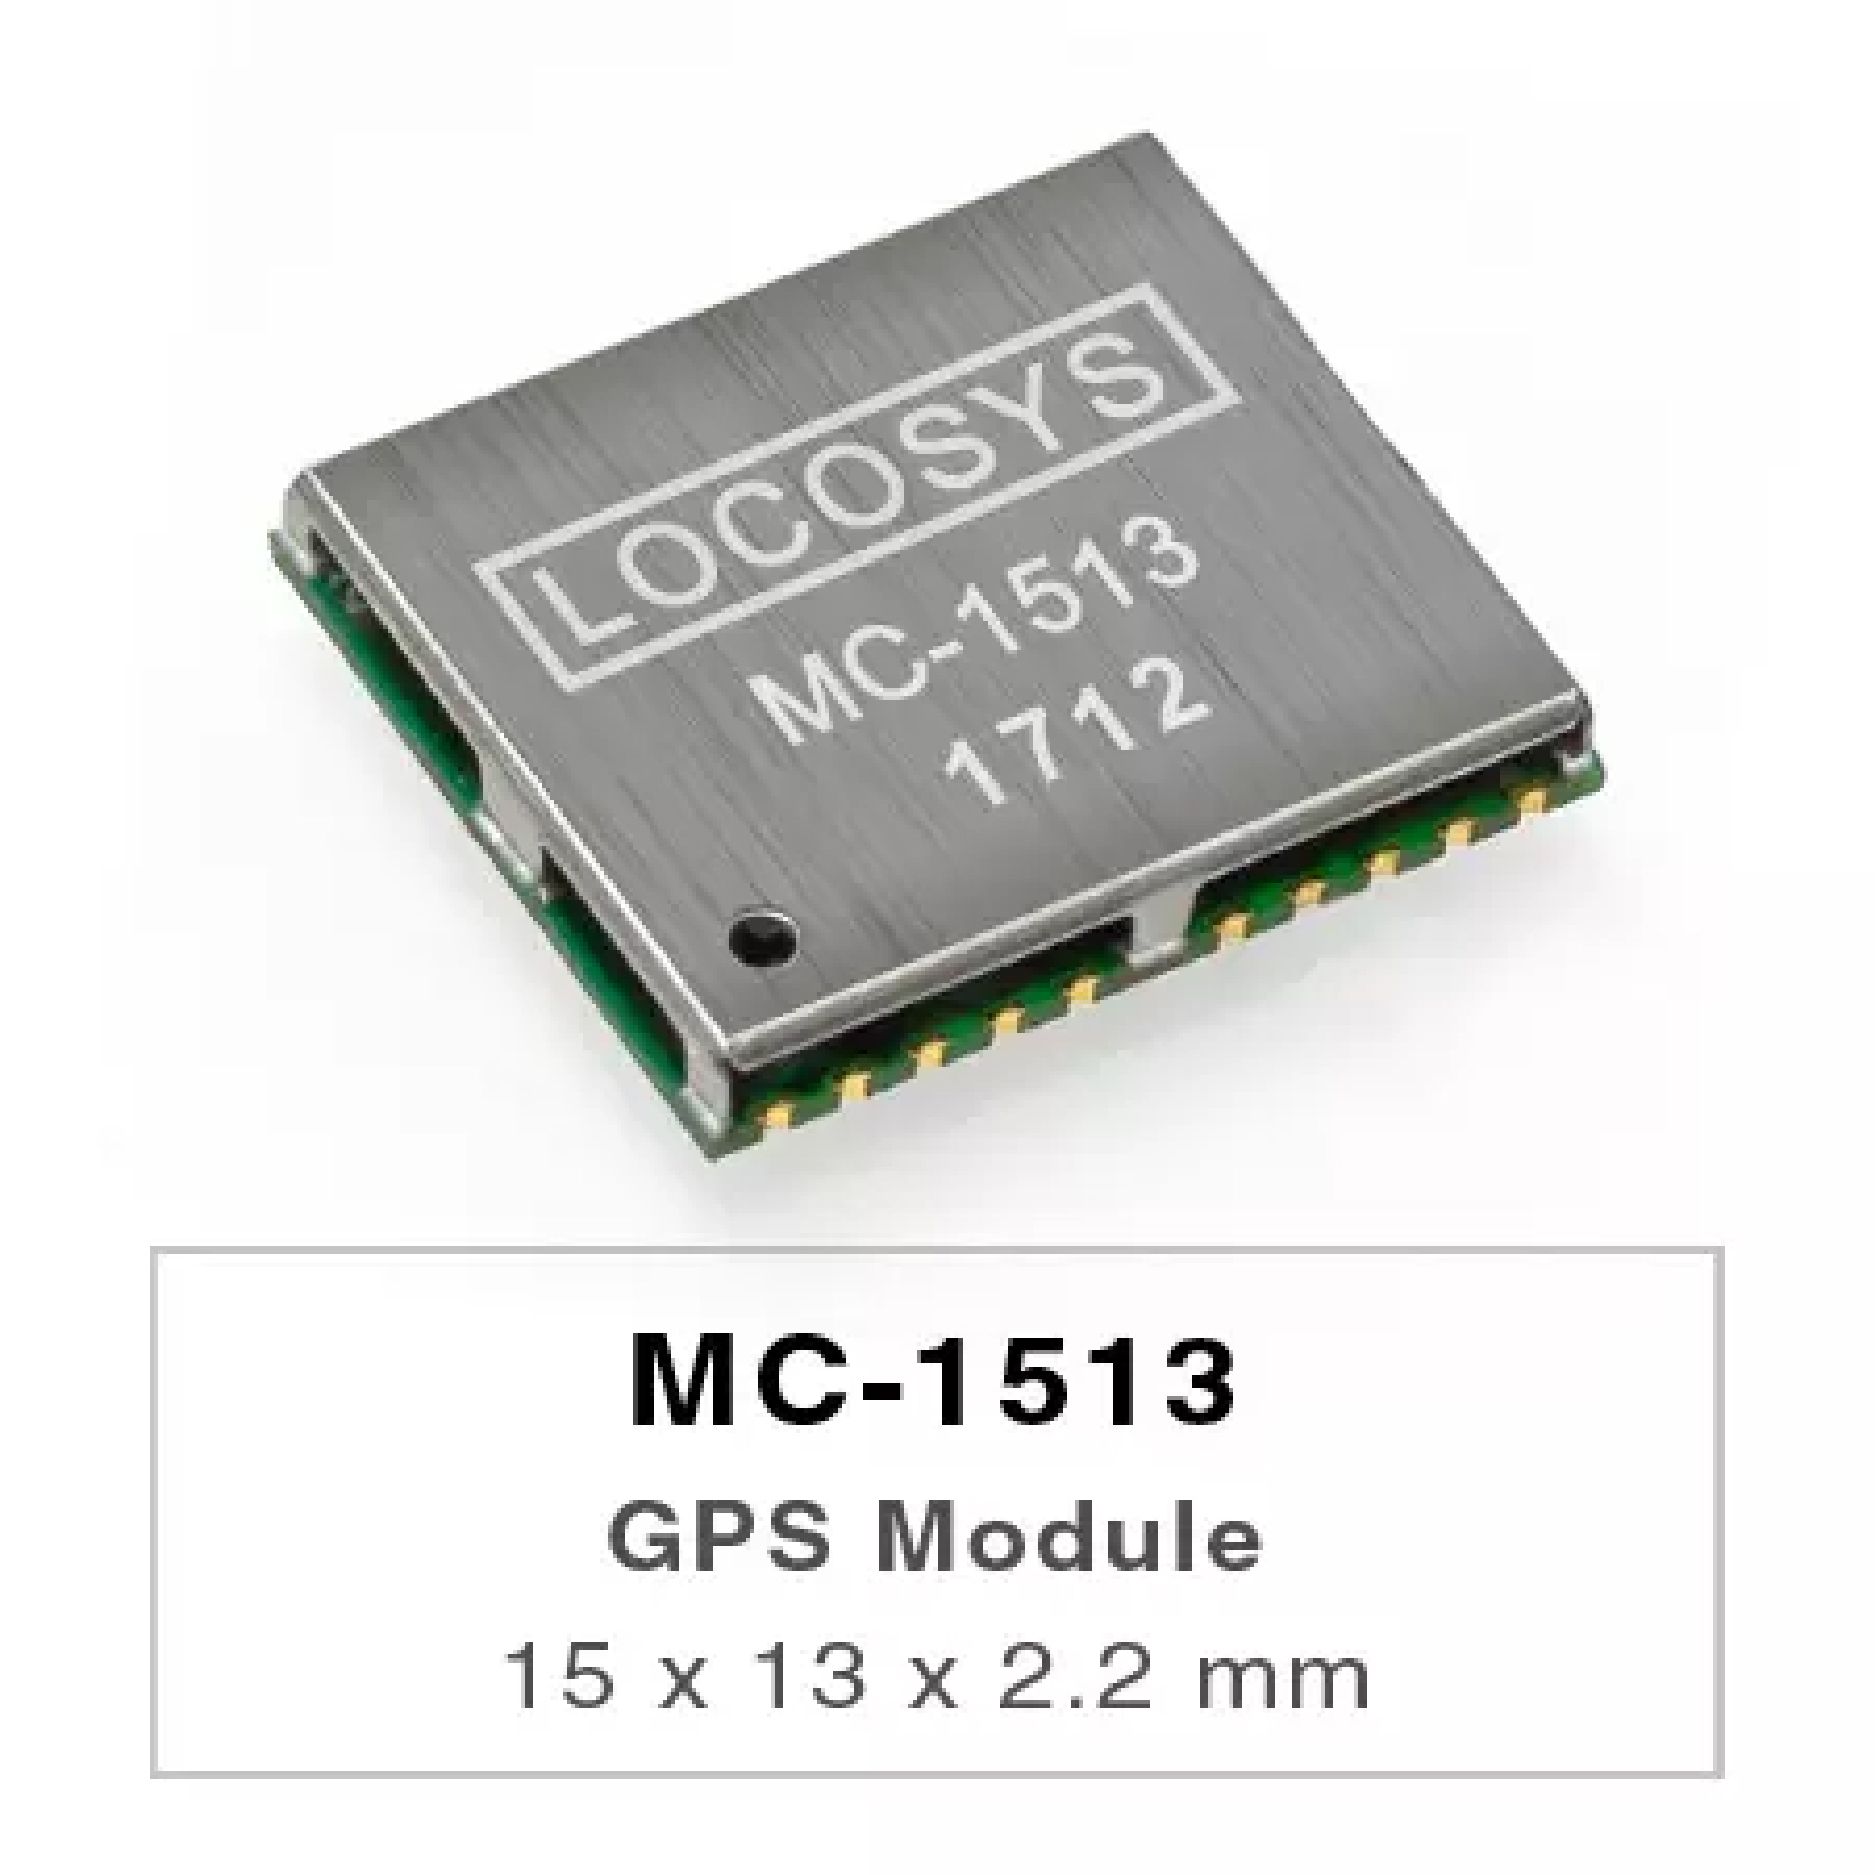 LOCOSYS MC-1513 GPS module features high sensitivity, low power and ultra small form factor.